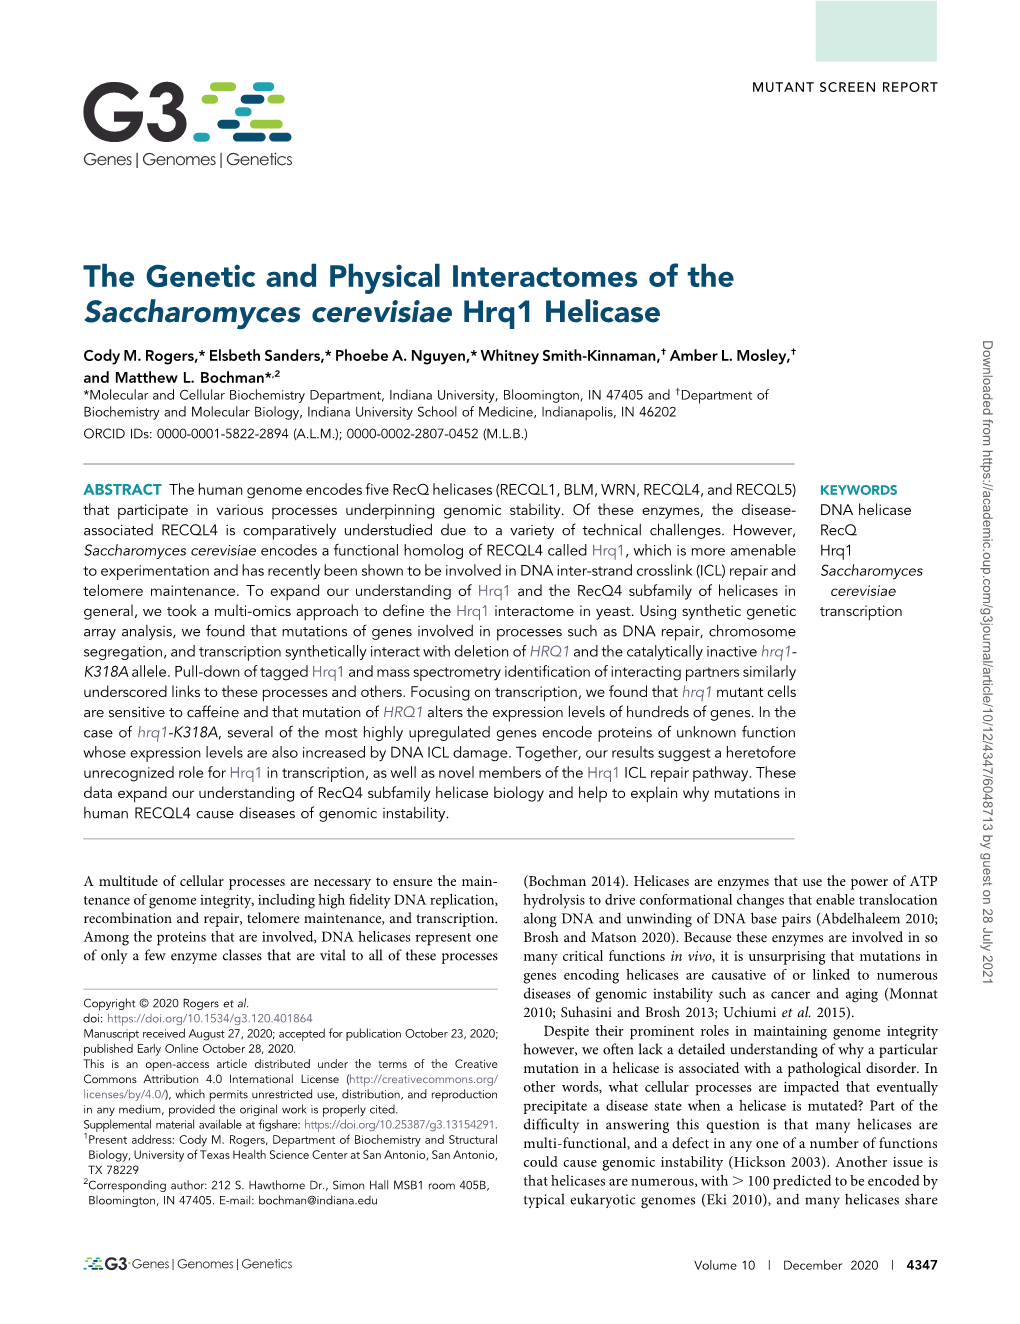 The Genetic and Physical Interactomes of the Saccharomyces Cerevisiae Hrq1 Helicase